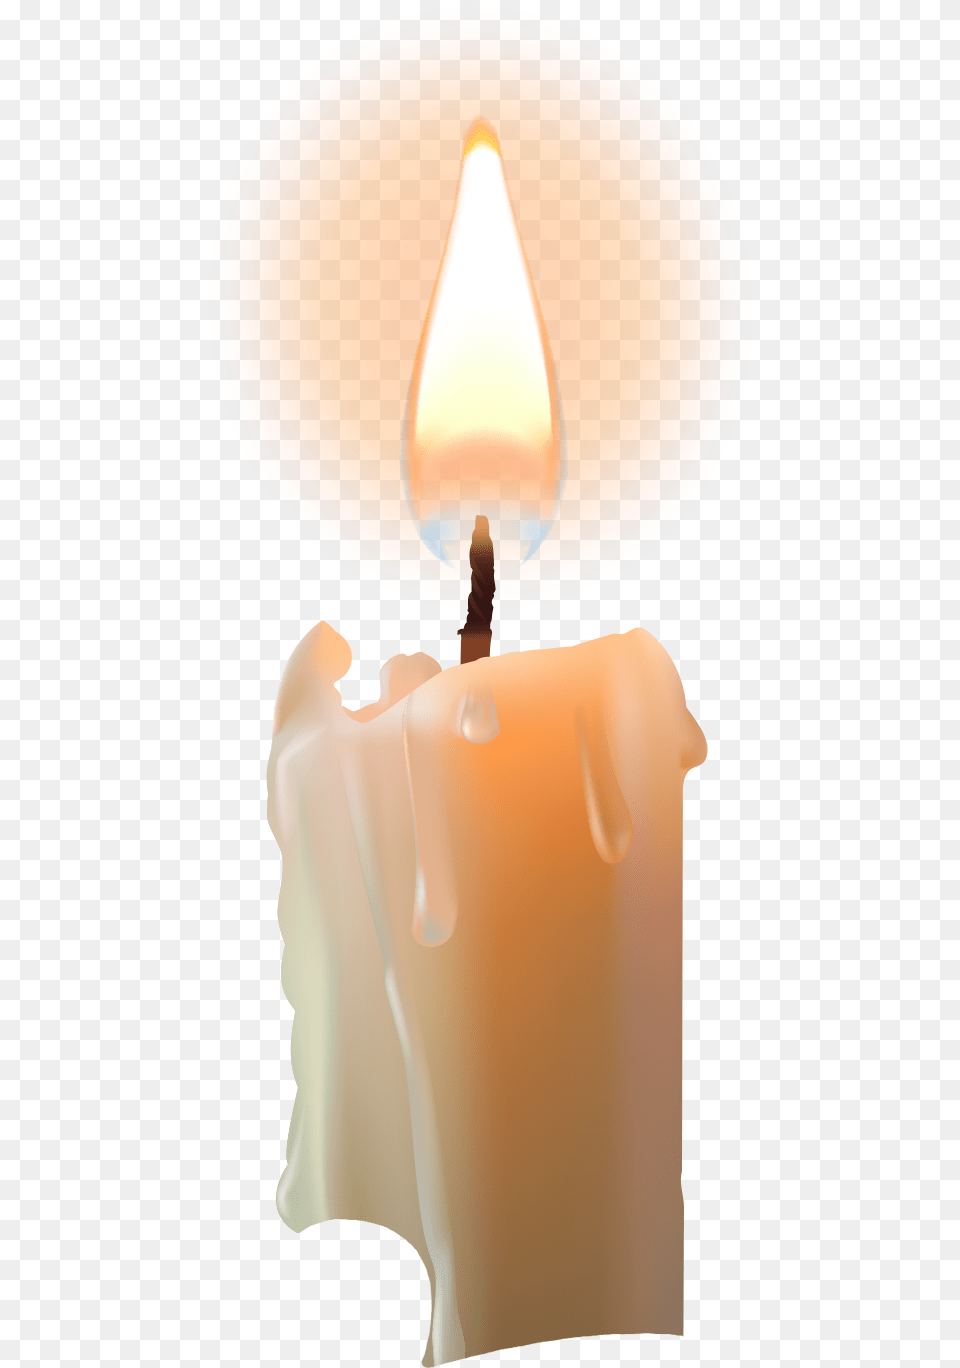 Candle Blessing Computer For File Download Free Advent Candle, Fire, Flame, Adult, Female Png